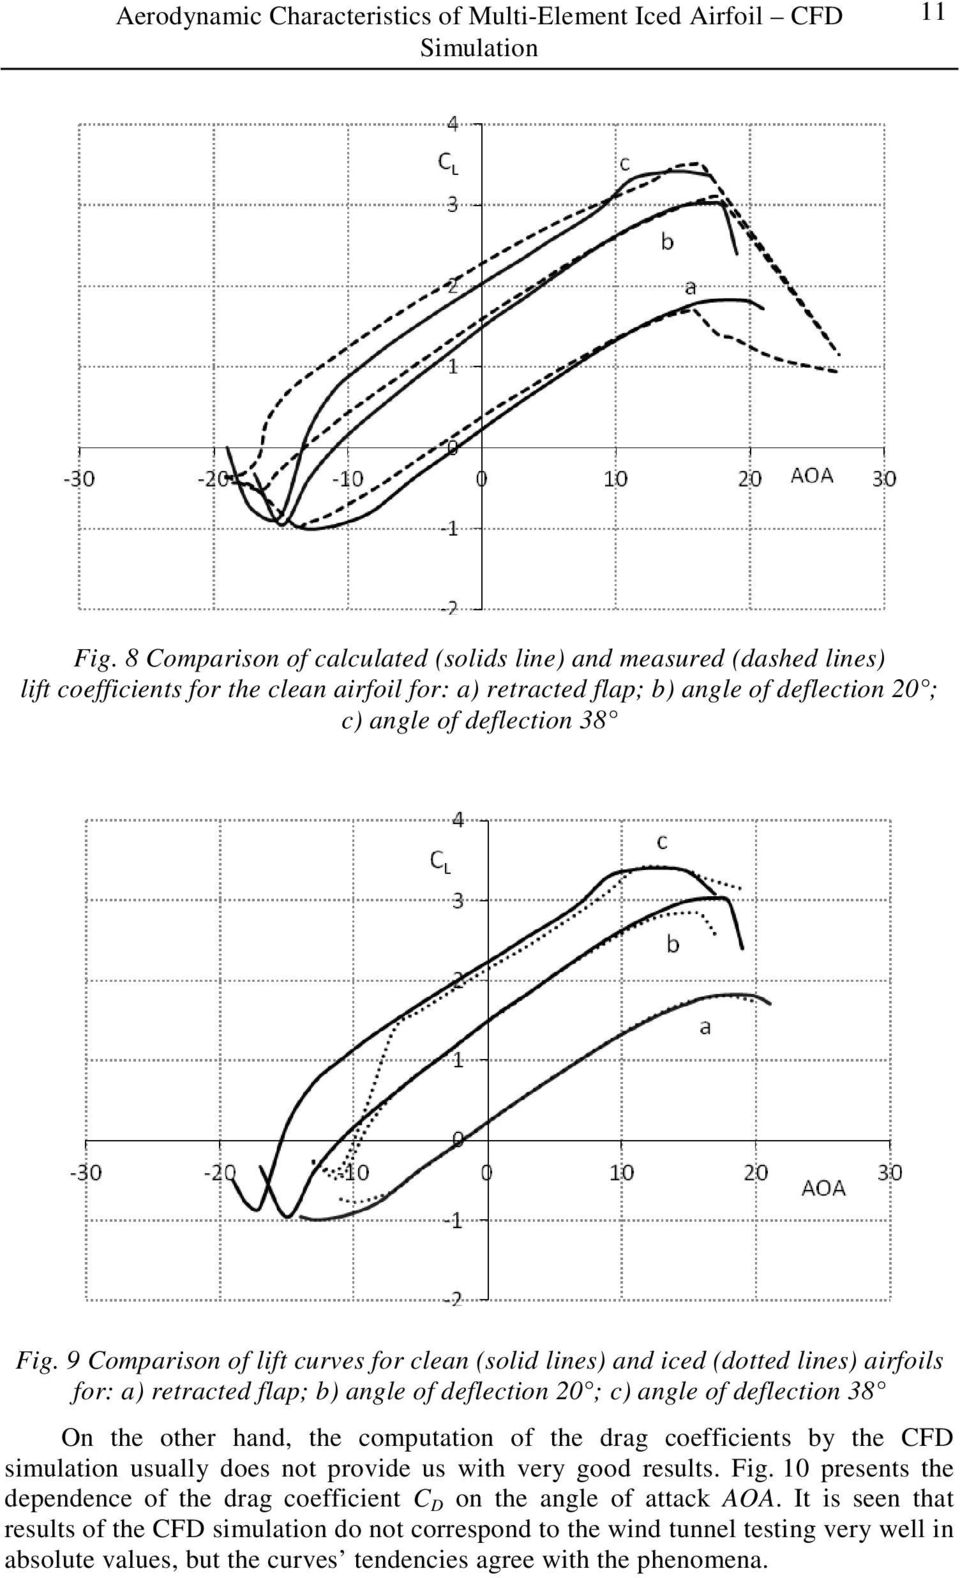 9 Comparison of lift curves for clean (solid lines) and iced (dotted lines) airfoils for: a) retracted flap; b) angle of deflection 20 ; c) angle of deflection 38 On the other hand, the computation